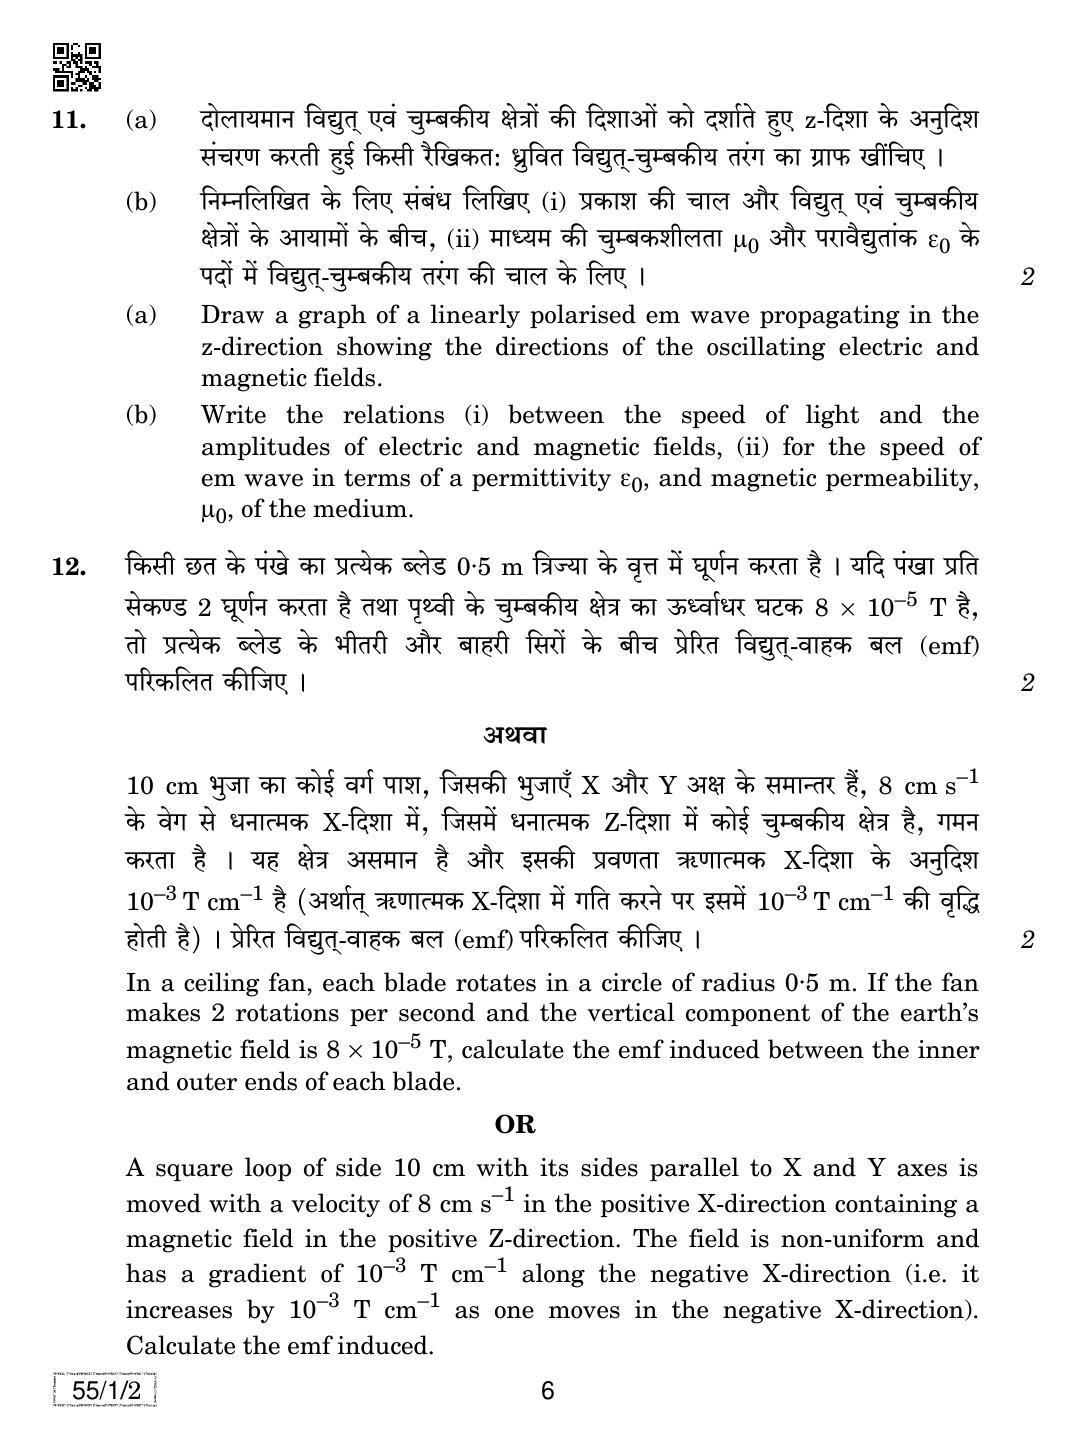 CBSE Class 12 55-1-2 PHYSICS 2019 Compartment Question Paper - Page 6